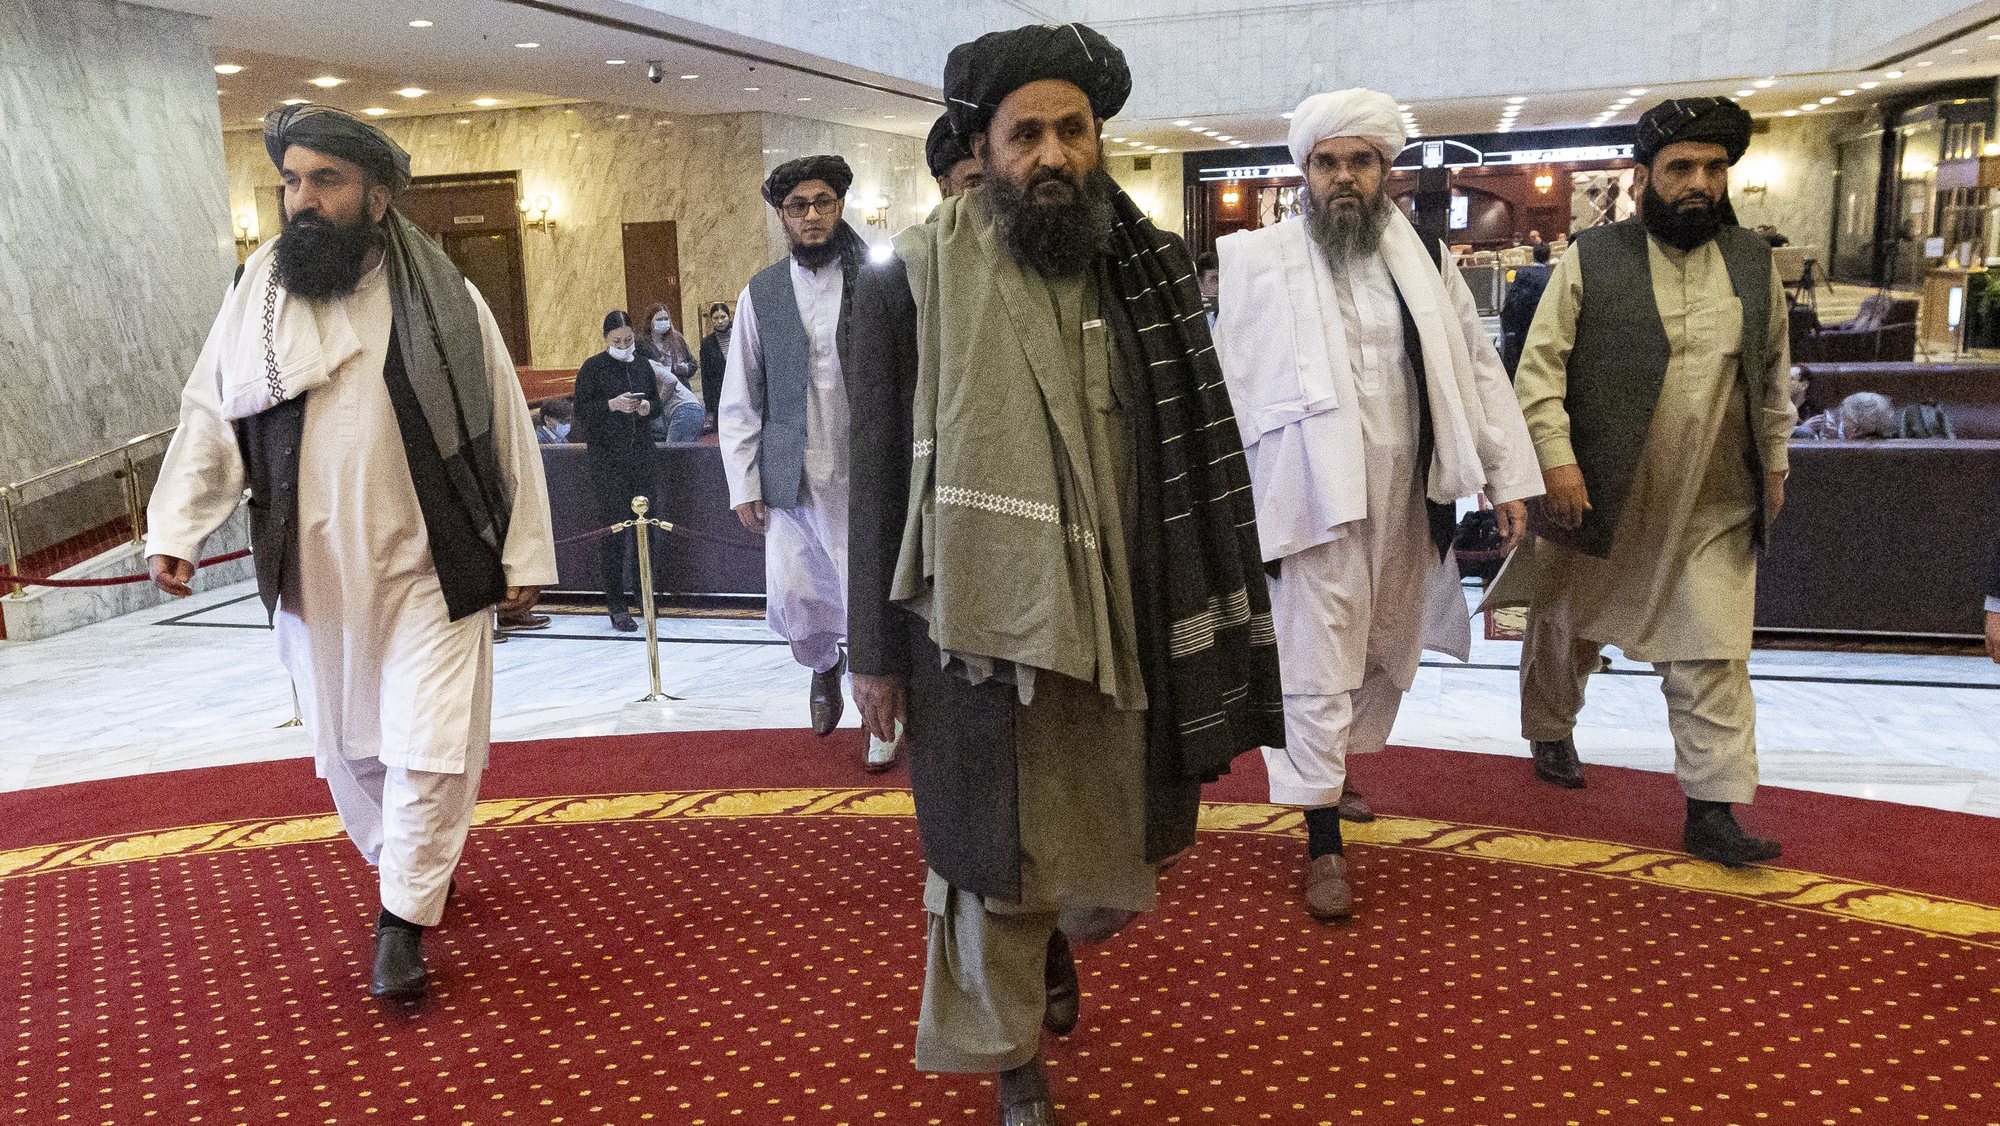 epa09082252 Taliban co-founder Mullah Abdul Ghani Baradar (C) arrives with other members of the Taliban delegation for attending an international peace conference in Moscow, Russia, 18 March 2021. Russia is hosting a peace conference for Afghanistan, bringing together government representatives and their Taliban adversaries along with regional observers in a bid to help jump-start the country&#039;s stalled peace process. The one-day gathering Thursday is the first of three planned international conferences ahead of a May 1 deadline for the final withdrawal of U.S. and NATO troops from the country, a date fixed under a year-old agreement between the Trump administration and the Taliban.  EPA/ALEXANDER ZEMLIANICHENKO / POOL